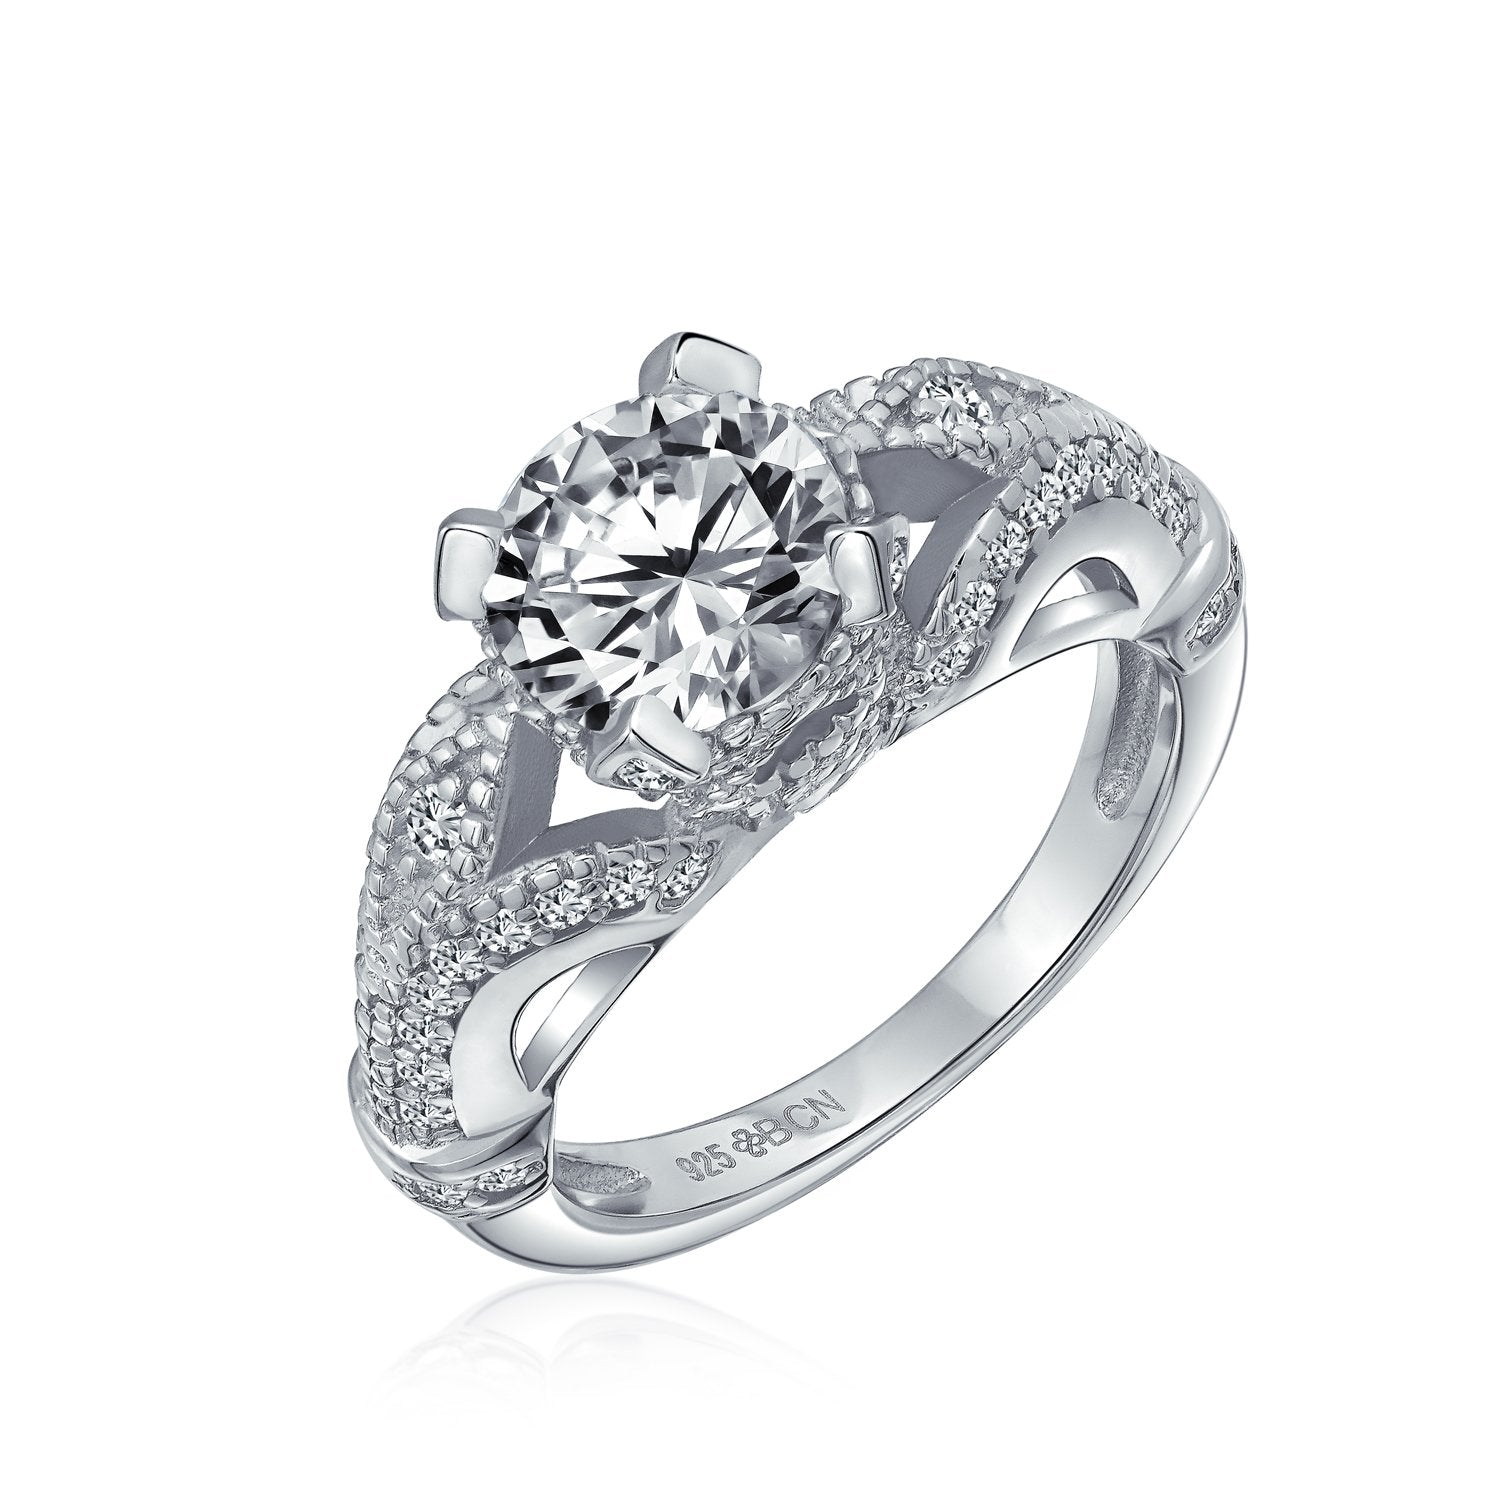 3CT Solitaire 925 Sterling Silver Filigree AAA CZ Engagement Ring - Joyeria Lady